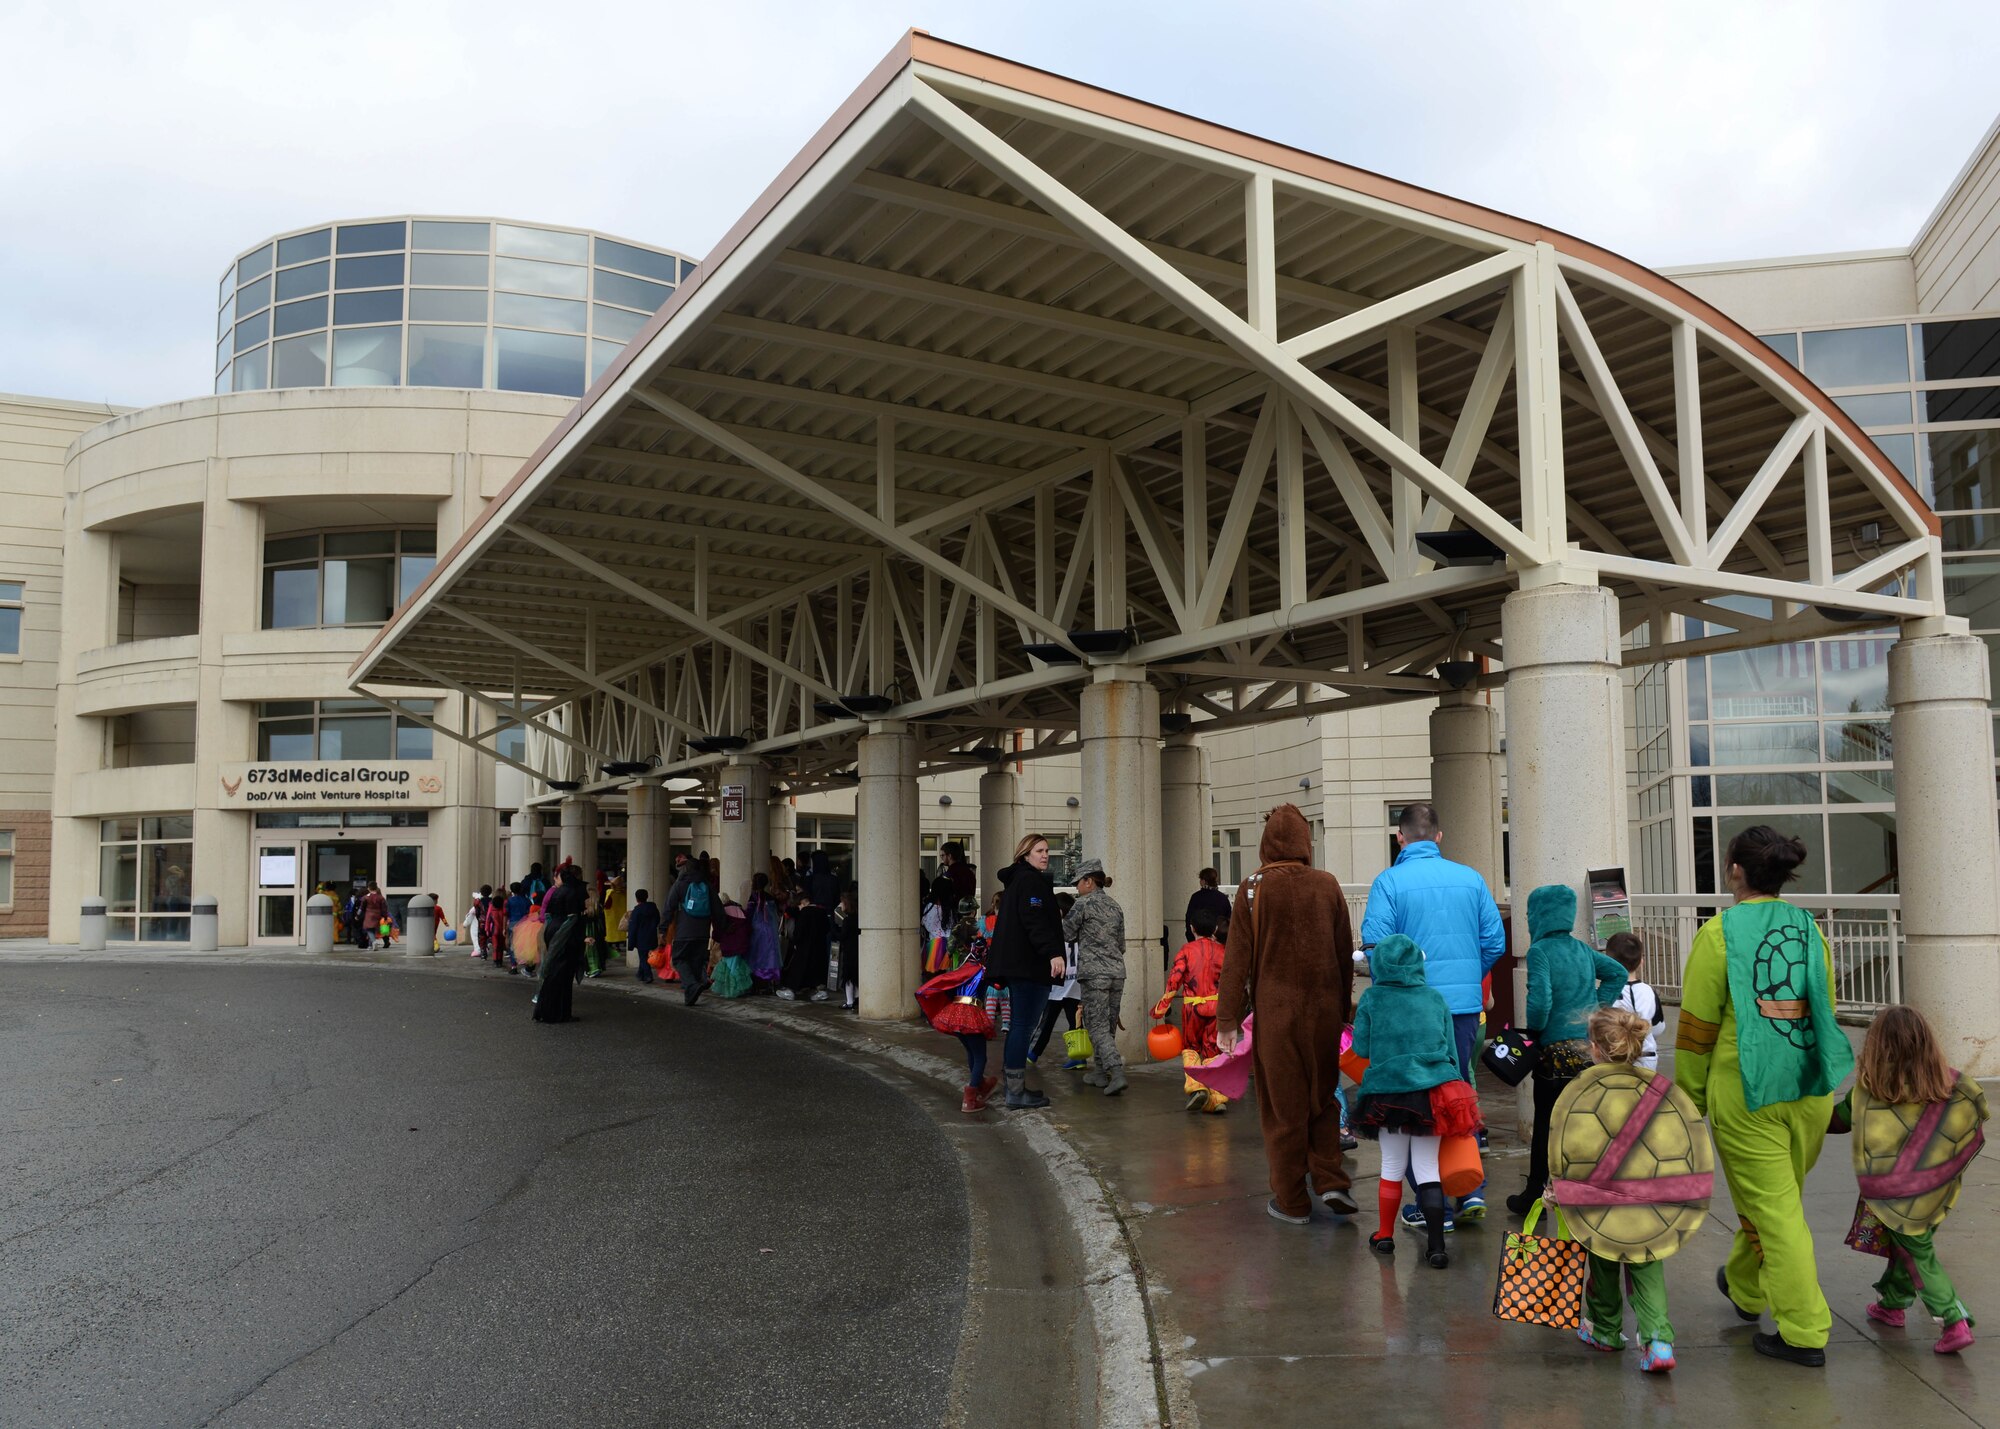 Families line up for the trick-or-treat event at the hospital on Joint Base Elmendorf-Richardson, Alaska, Oct. 27, 2017. Costumed JBER hospital workers with themes picked by their individual clinics will hand out candy to people of all ages during the annual event scheduled for Oct. 26, 2018.